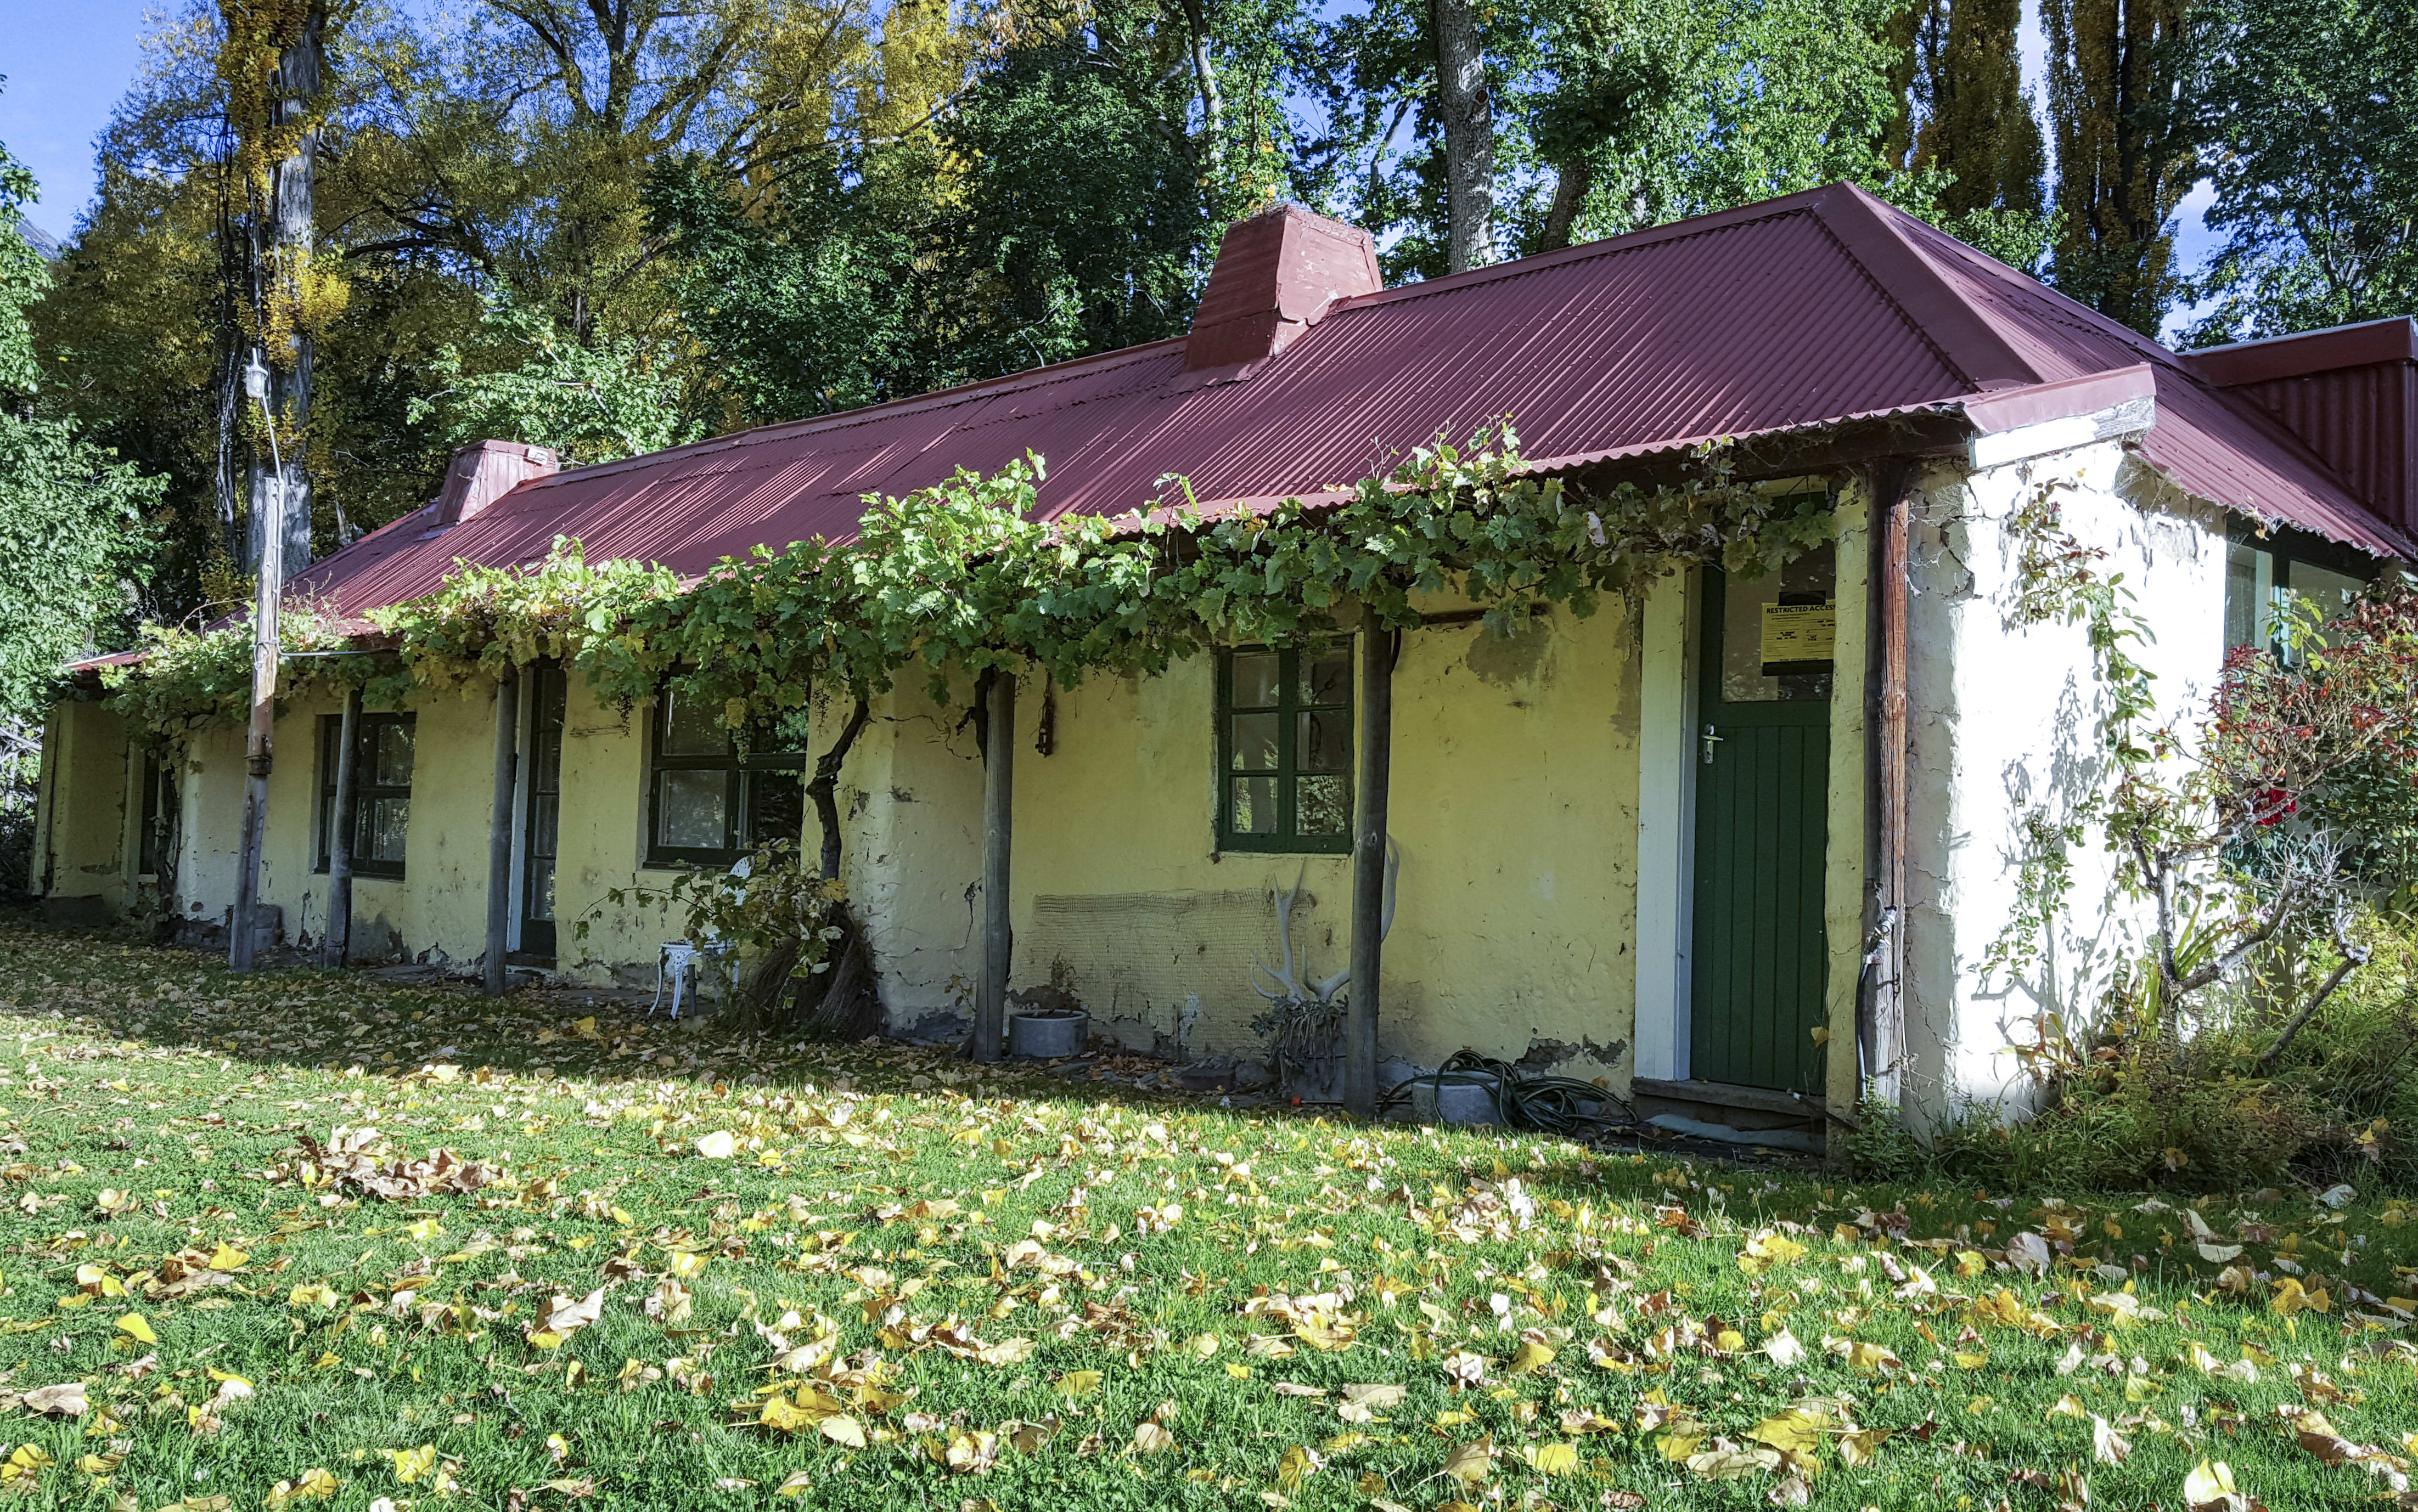 The historic cob cottage built in 1859 that is now unsafe to live in